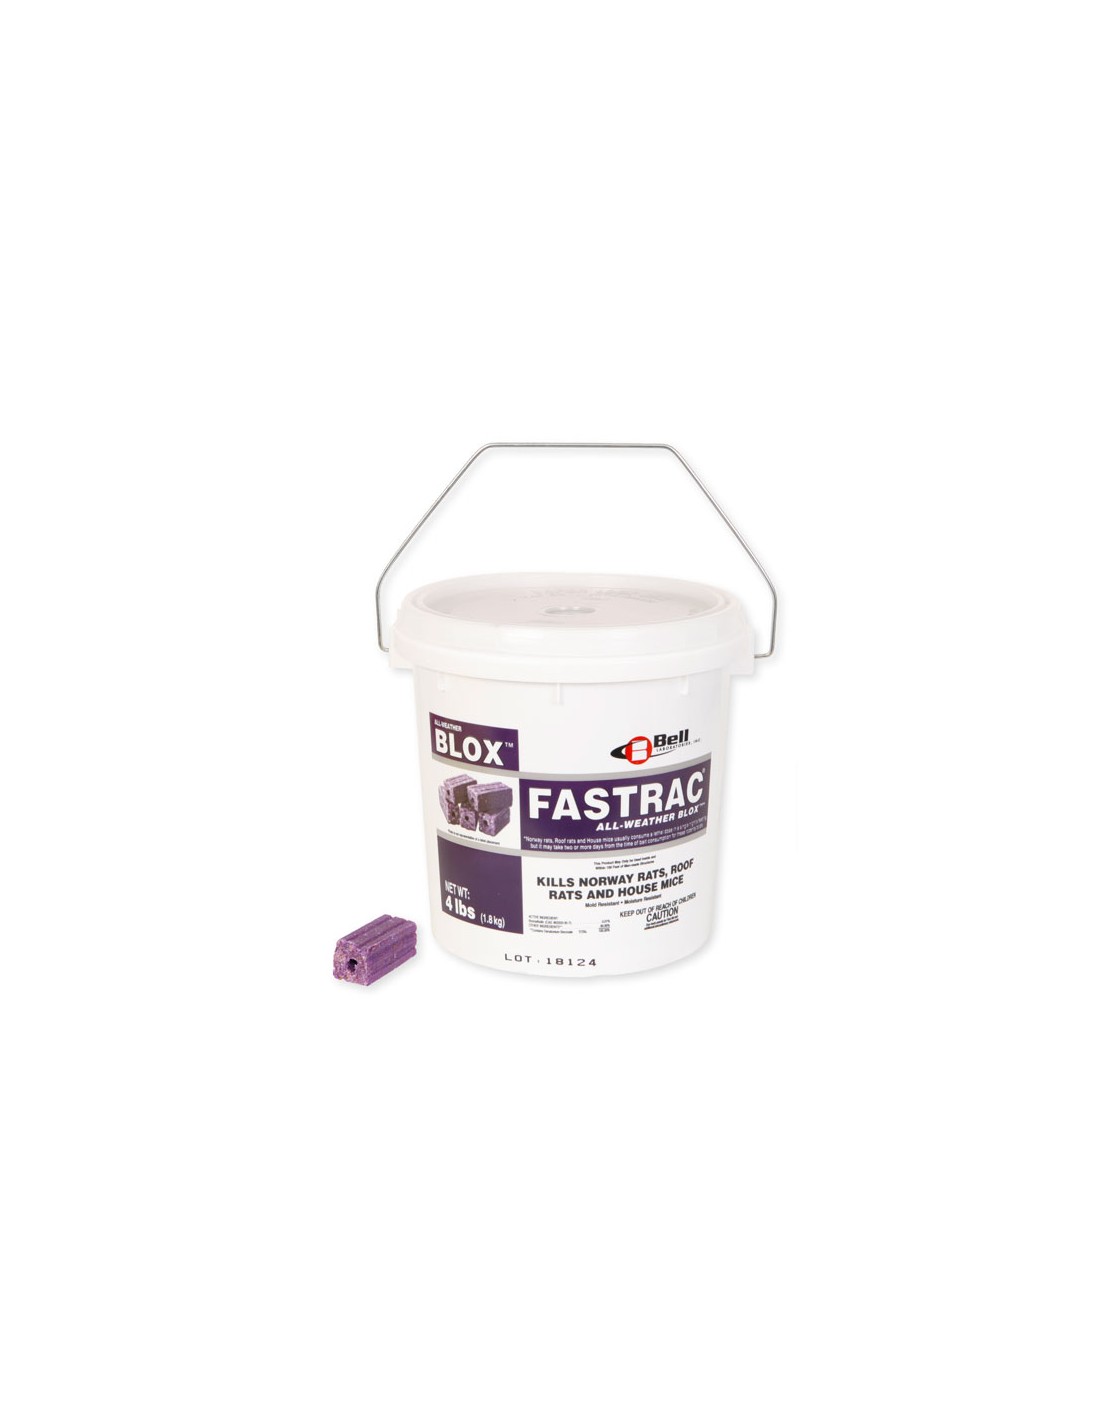 How many blocks are in the 4 pound pail of Fastrac?